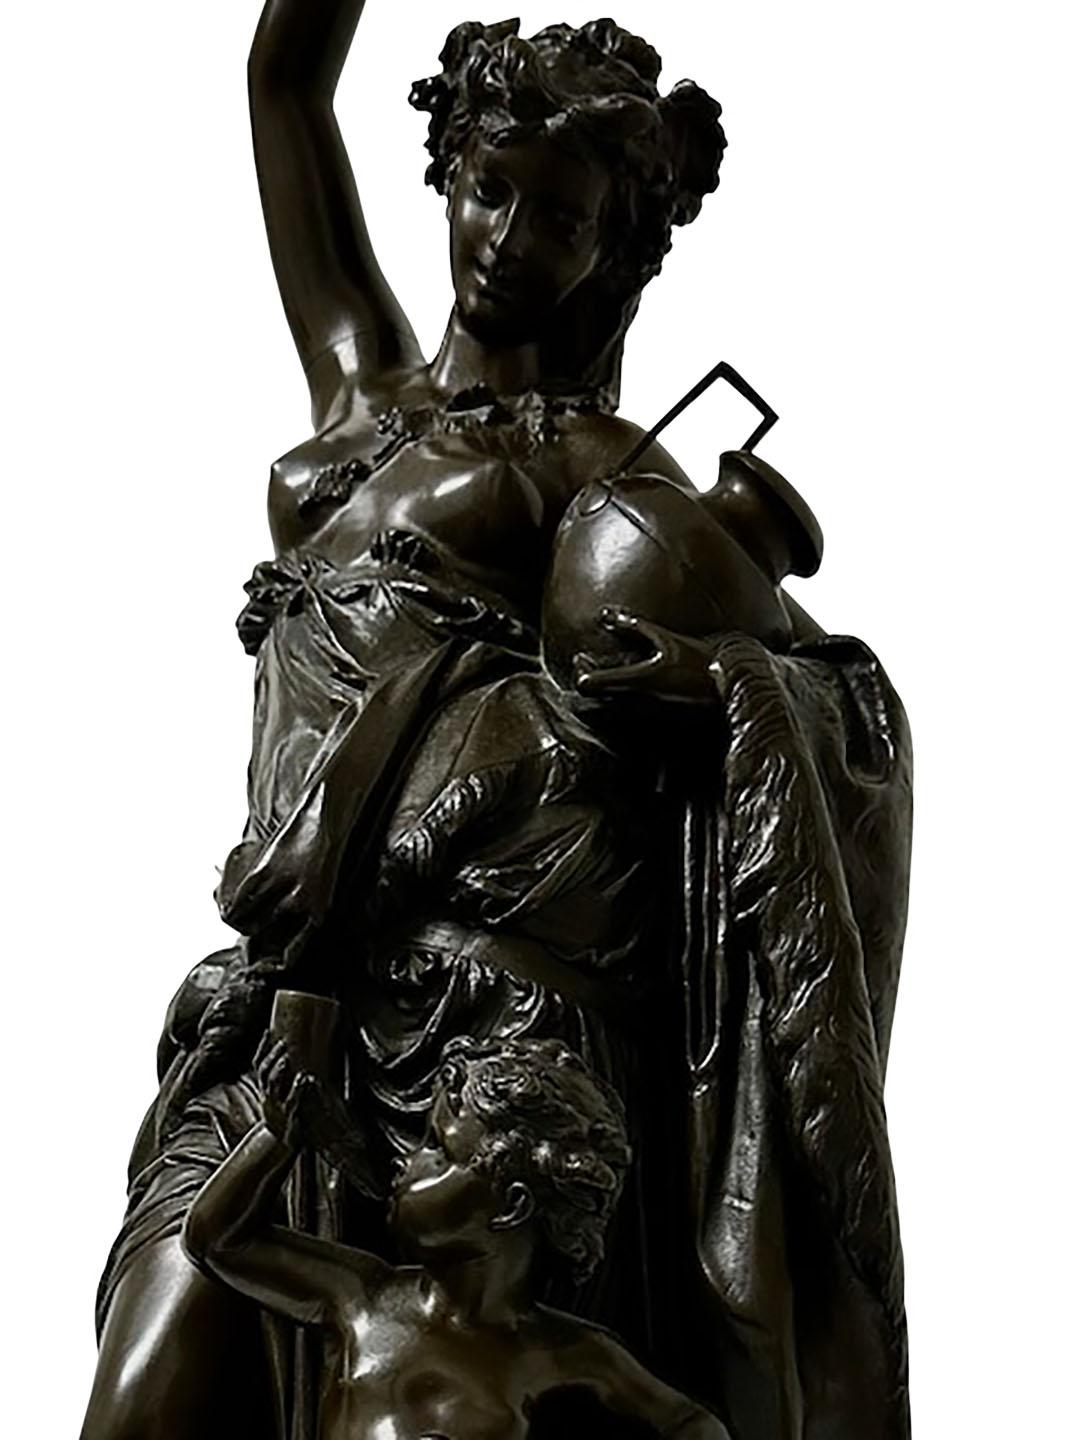 An antique bronze statute of a maiden and putti on a round marble base. In the style of A. Carrier Belleuse. circa 1850s to 1890s, France. Unsigned.